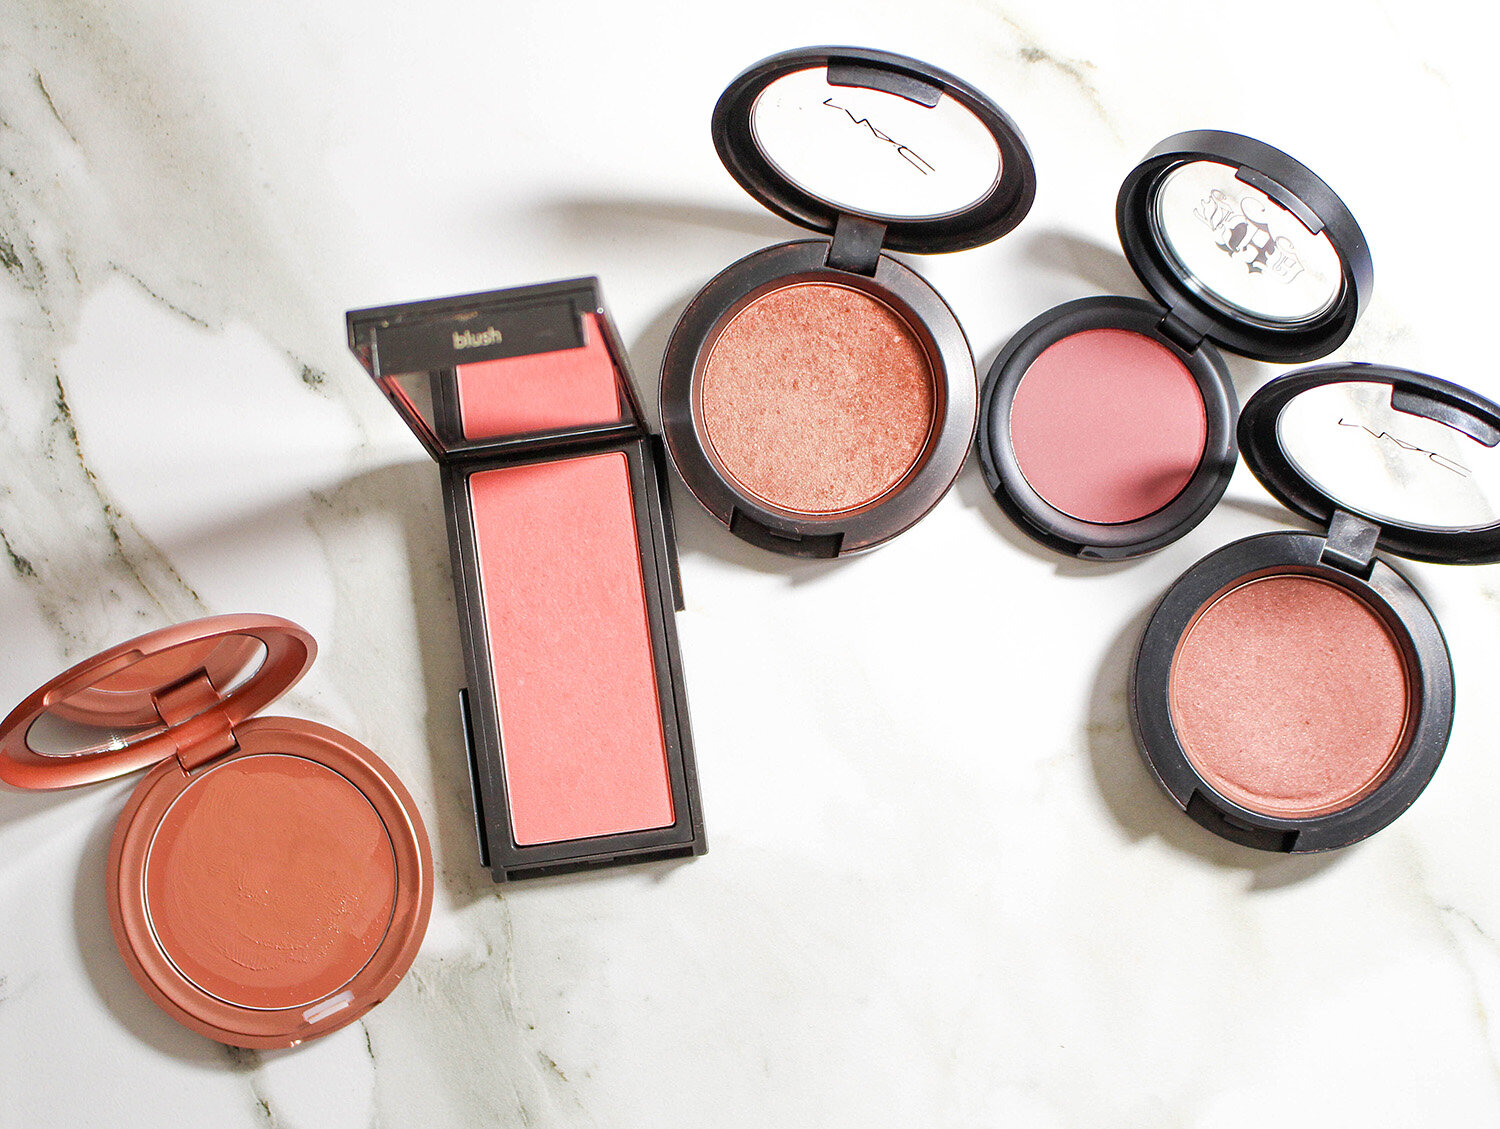 My go to everyday blushes.